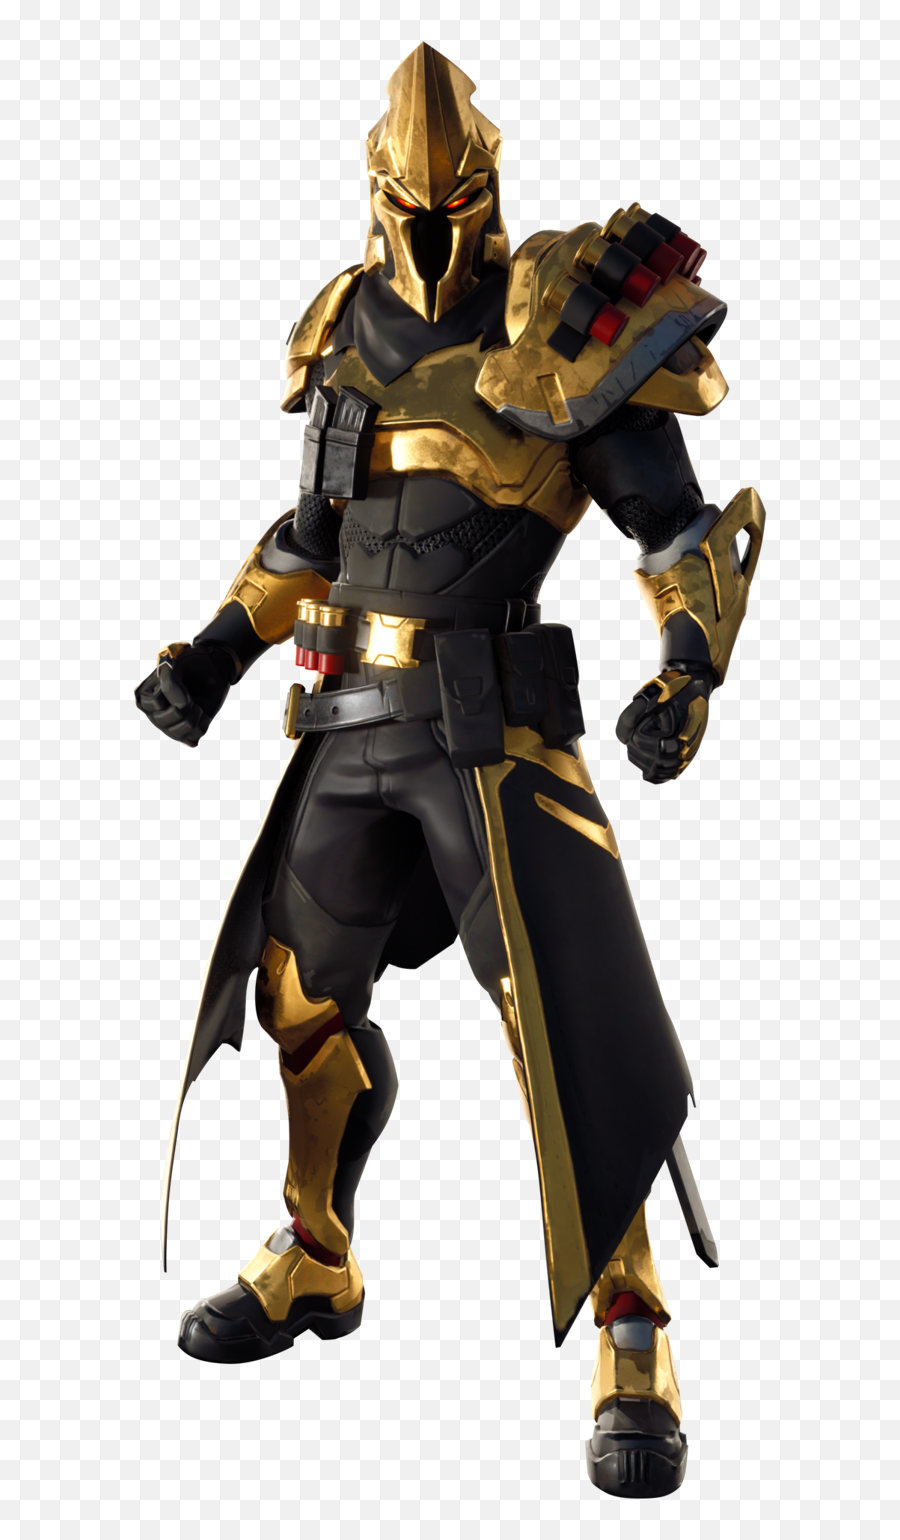 Fortnite Ultima Knight Skin - Character Png Images Pro Fortnite Season X Ultimate Knight Emoji,Knight Png